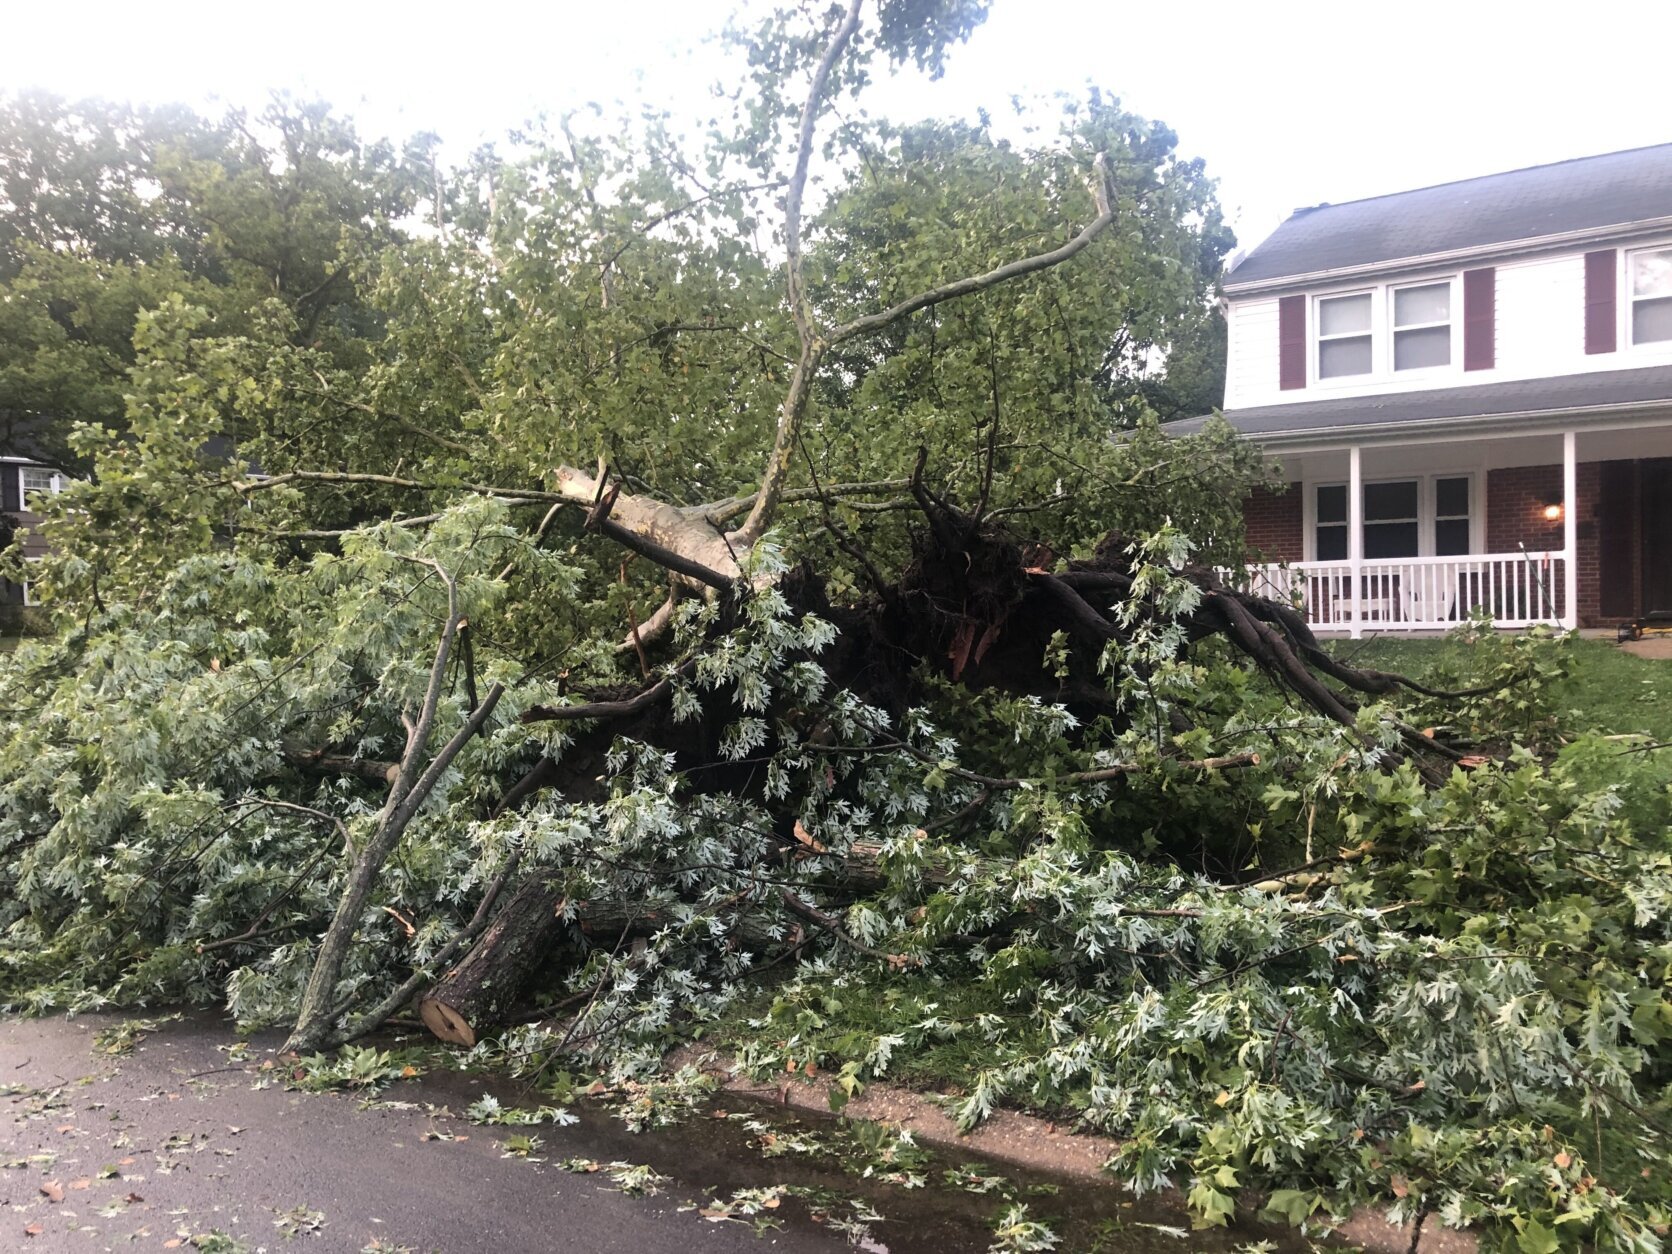 <h3>Bowie tornado</h3>
<p>A moderate tornado whirled through Bowie, Maryland, on July 5, 2022.</p>
<p>The National Weather Service determined that <a href="https://wtop.com/local/2022/07/damages-reported-in-md-as-national-weather-service-investigate-suspected-tornadic-activity/">the EF-1 tornado</a> was only on the ground for about three minutes. It downed trees dozens of trees along a mile-long path through the &#8220;S&#8221; and &#8220;B&#8221; sections of Bowie.</p>
<p>There were no reported injuries, but a few homes were damaged by fallen trees.</p>
<p>The city water plant on Bradford Lane also sustained minor damage in the storm, but water service was not interrupted.</p>
